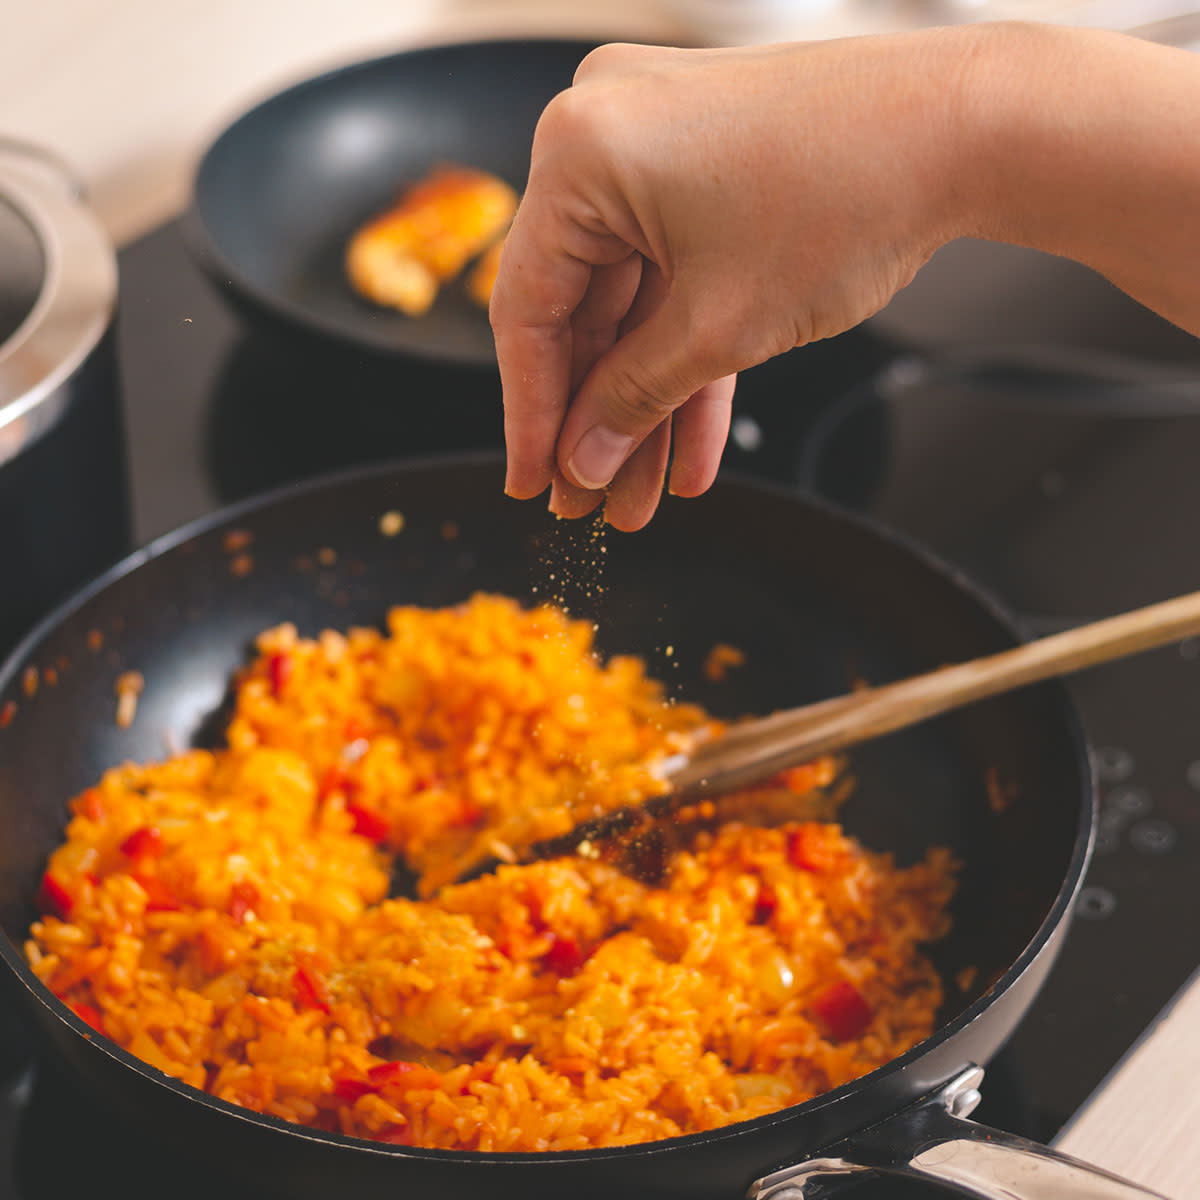 woman sprinkling spices into pan with food